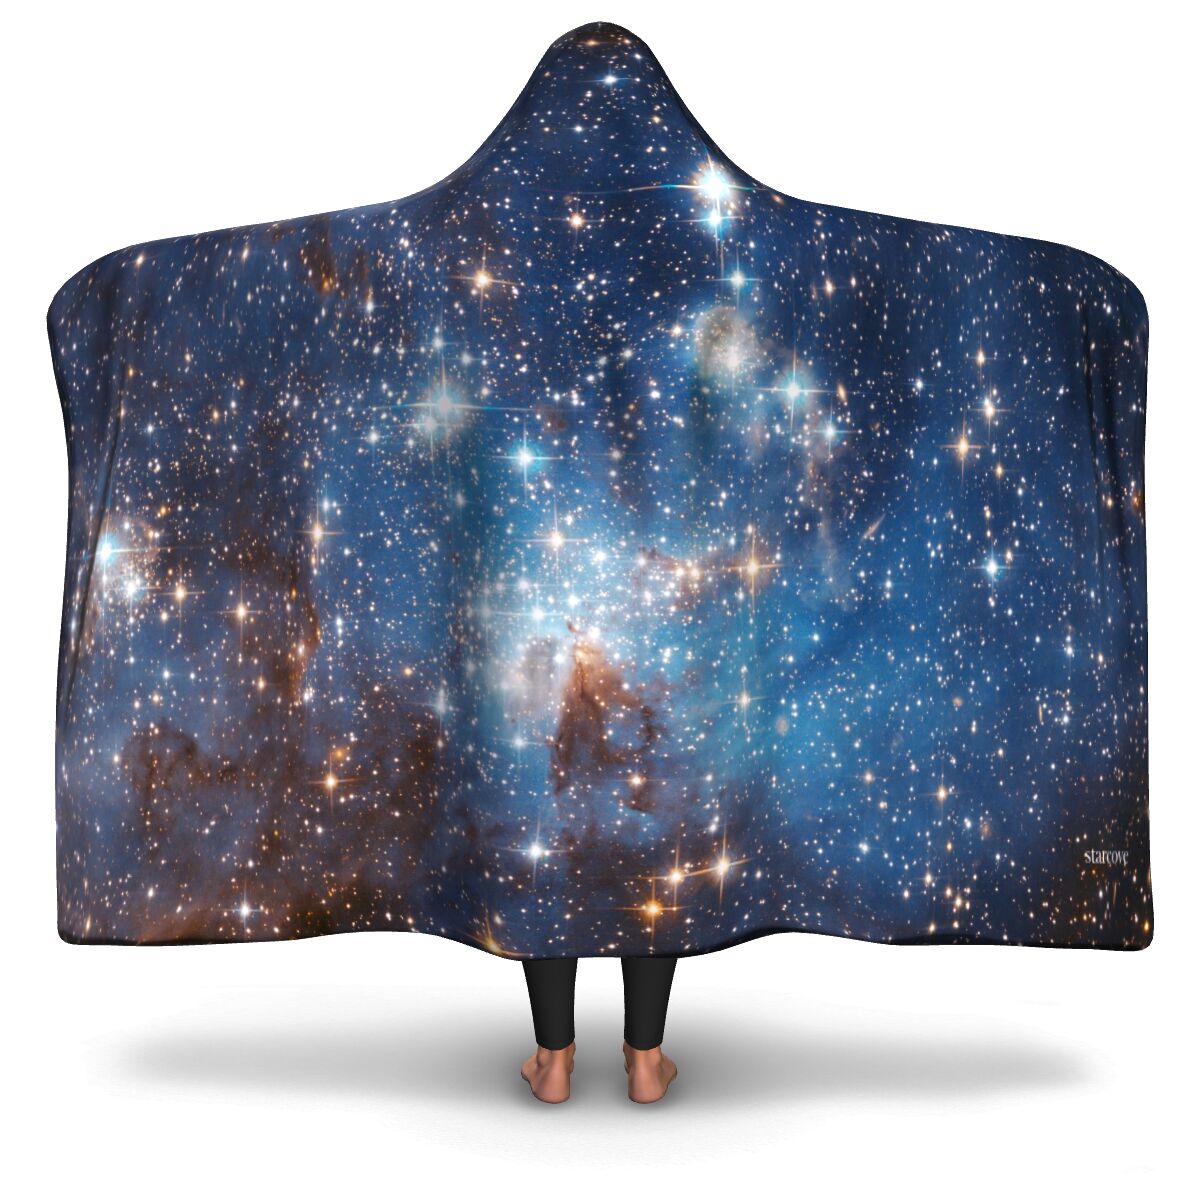 Galaxy Sherpa Hooded Blanket, Stars Outer Space Cosmic Constellation Celestial Fleece Microfleece Adult Youth Men Woman Wearable Winter Gift Starcove Fashion